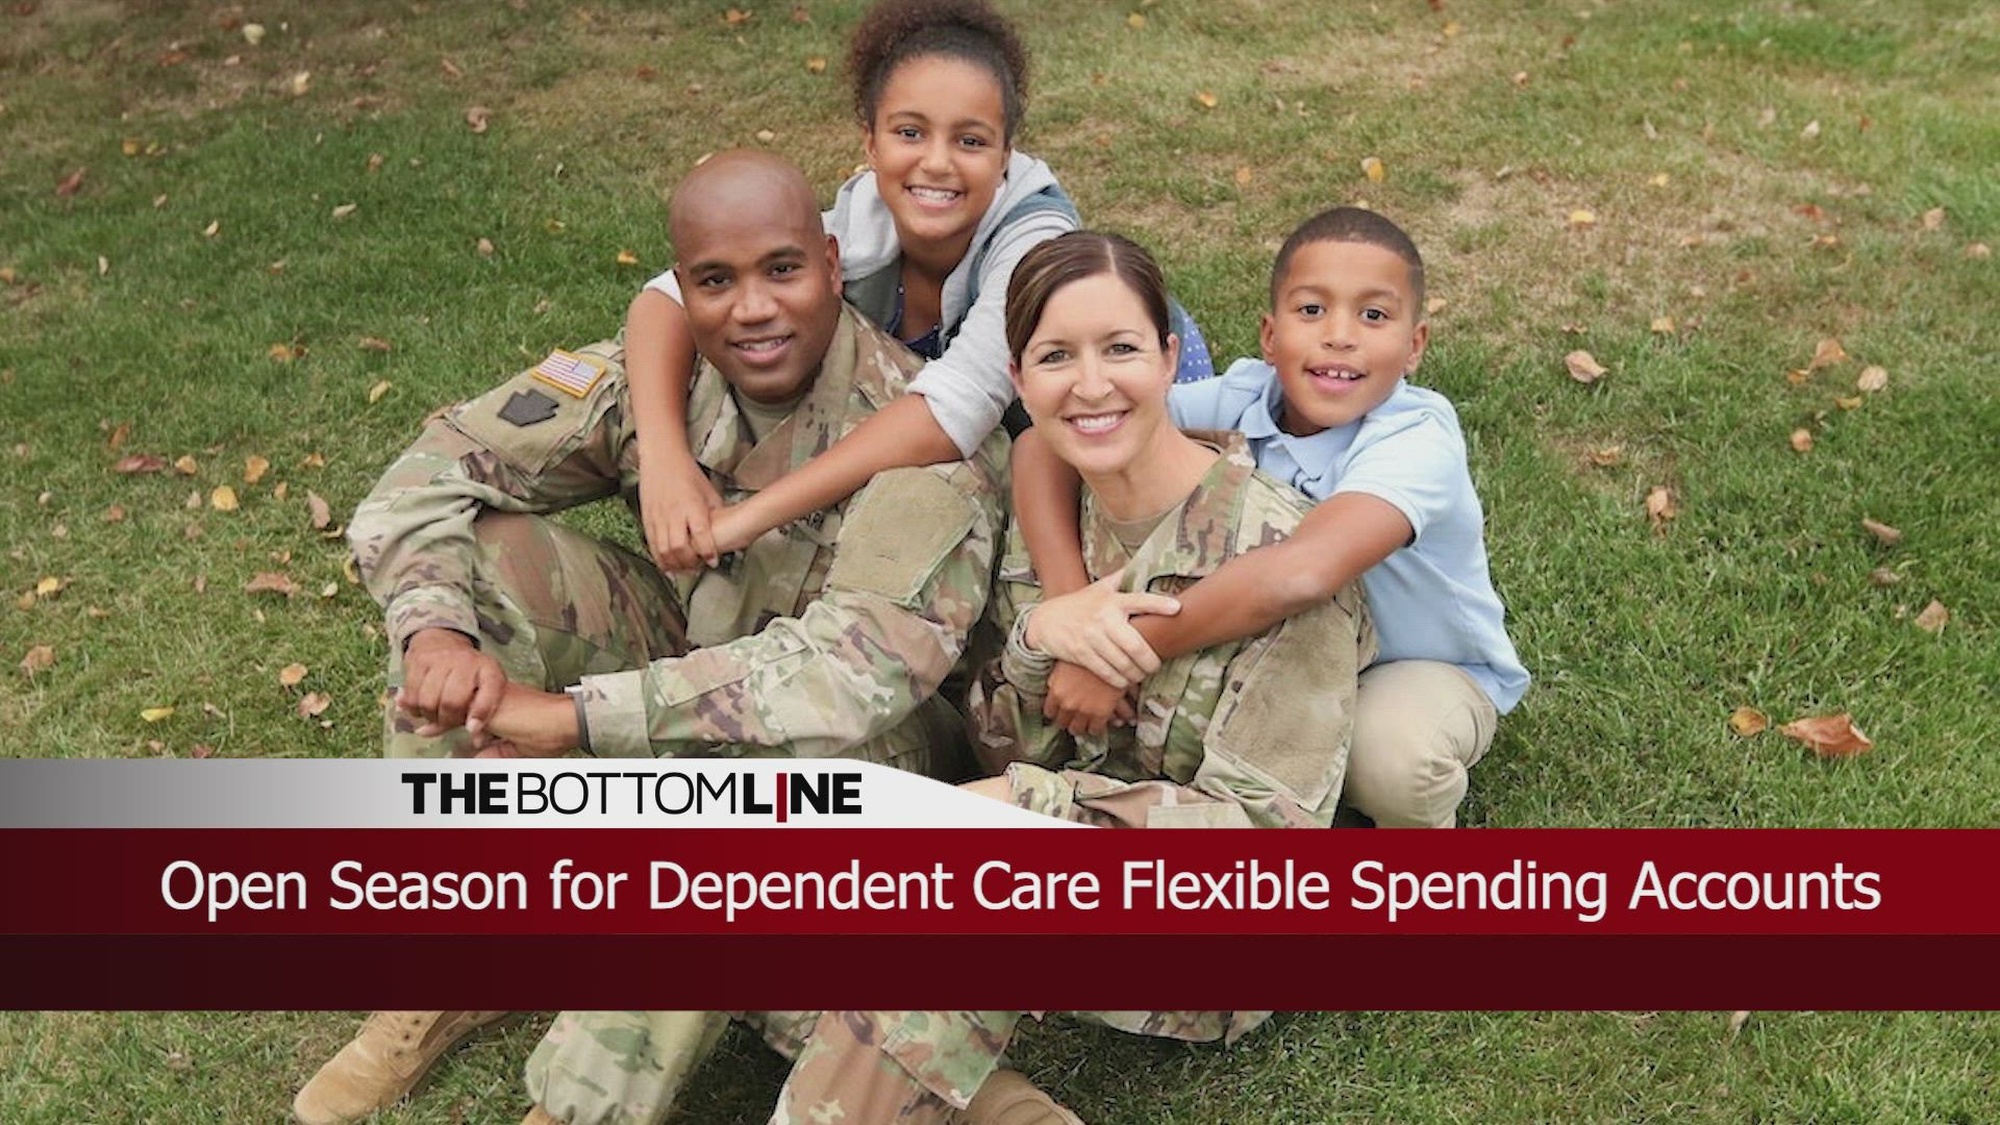 A U.S. Office of Personnel Management Public Service Announcement communicating the upcoming arrival of the Dependent Care Flexible Spending Account (DCFSA) program. Dependent Care FSAs can be used to pay for eligible dependent care services, such as preschool, summer day camp, before or after school programs, and child or adult daycare. (Video by Air Force Senior Airman Brandy Bodolay)